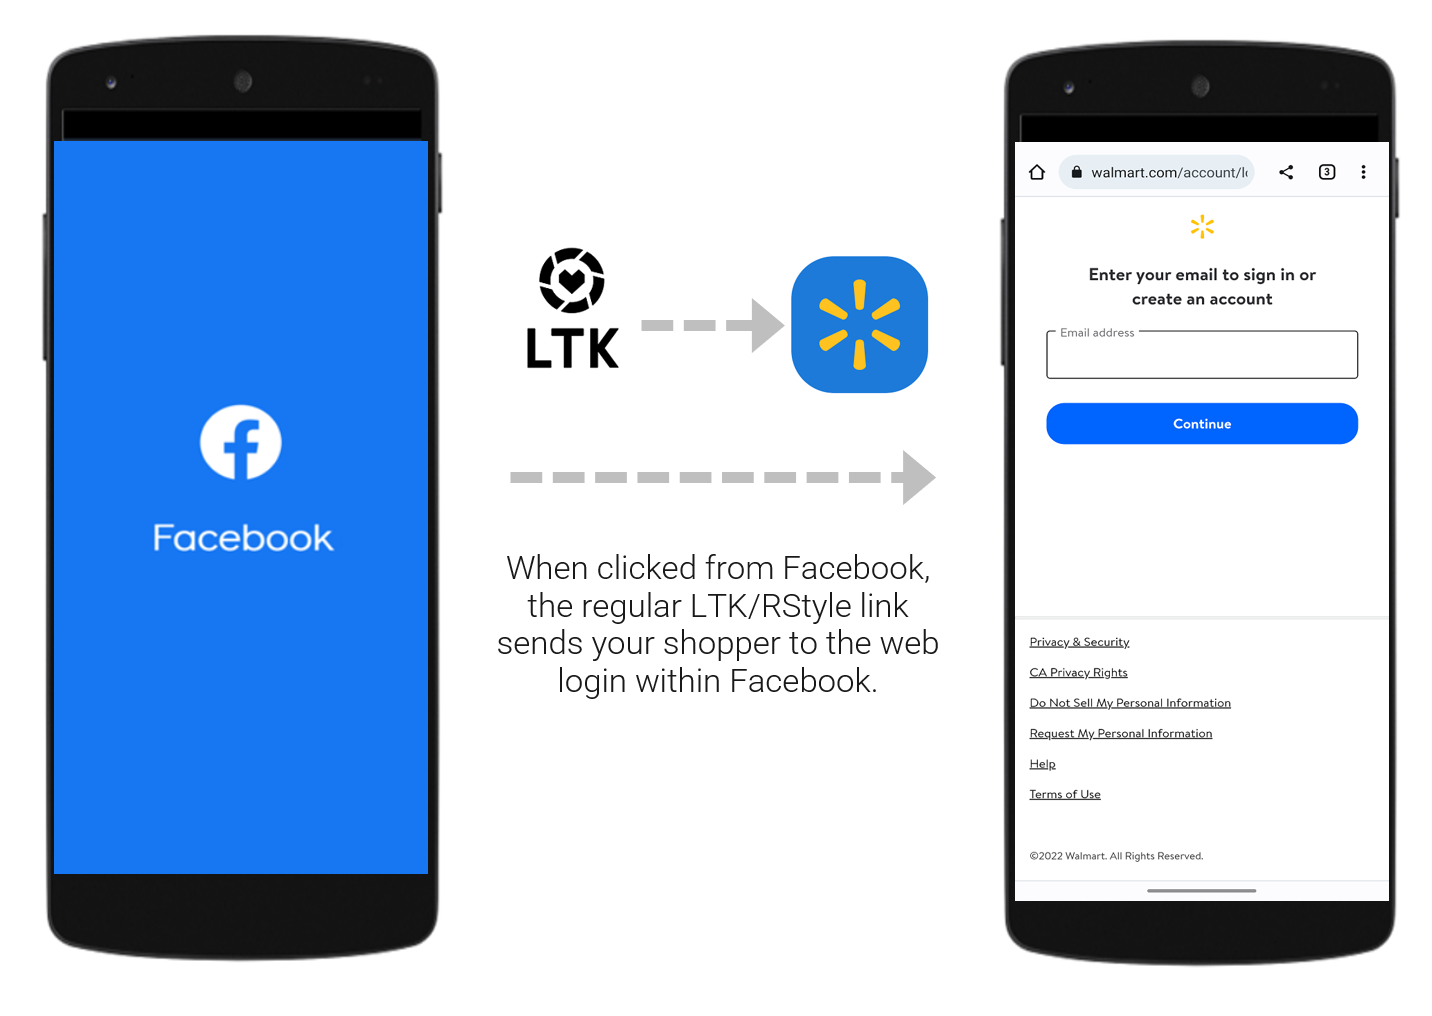 When clicked from Facebook, the regular LTK/RStyle link sends your shopper to the web login within facebook.